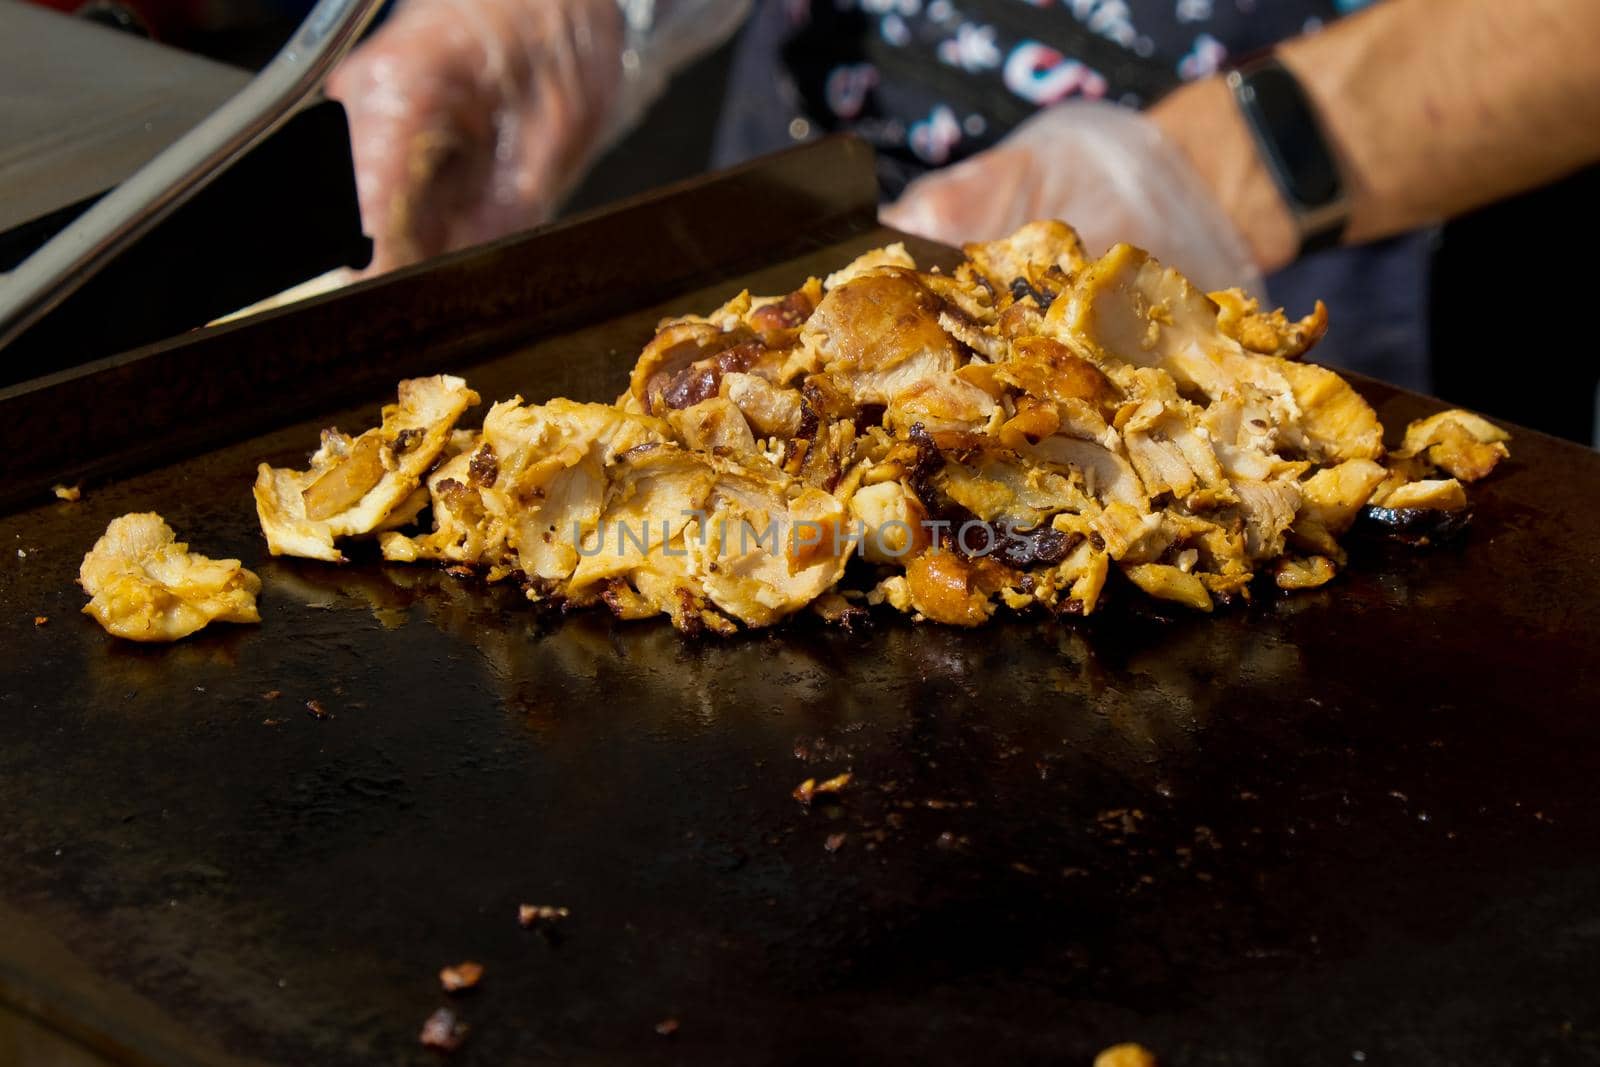 Chunks of fried chicken for making shawarma. Street food festival. Selective focus. by leonik